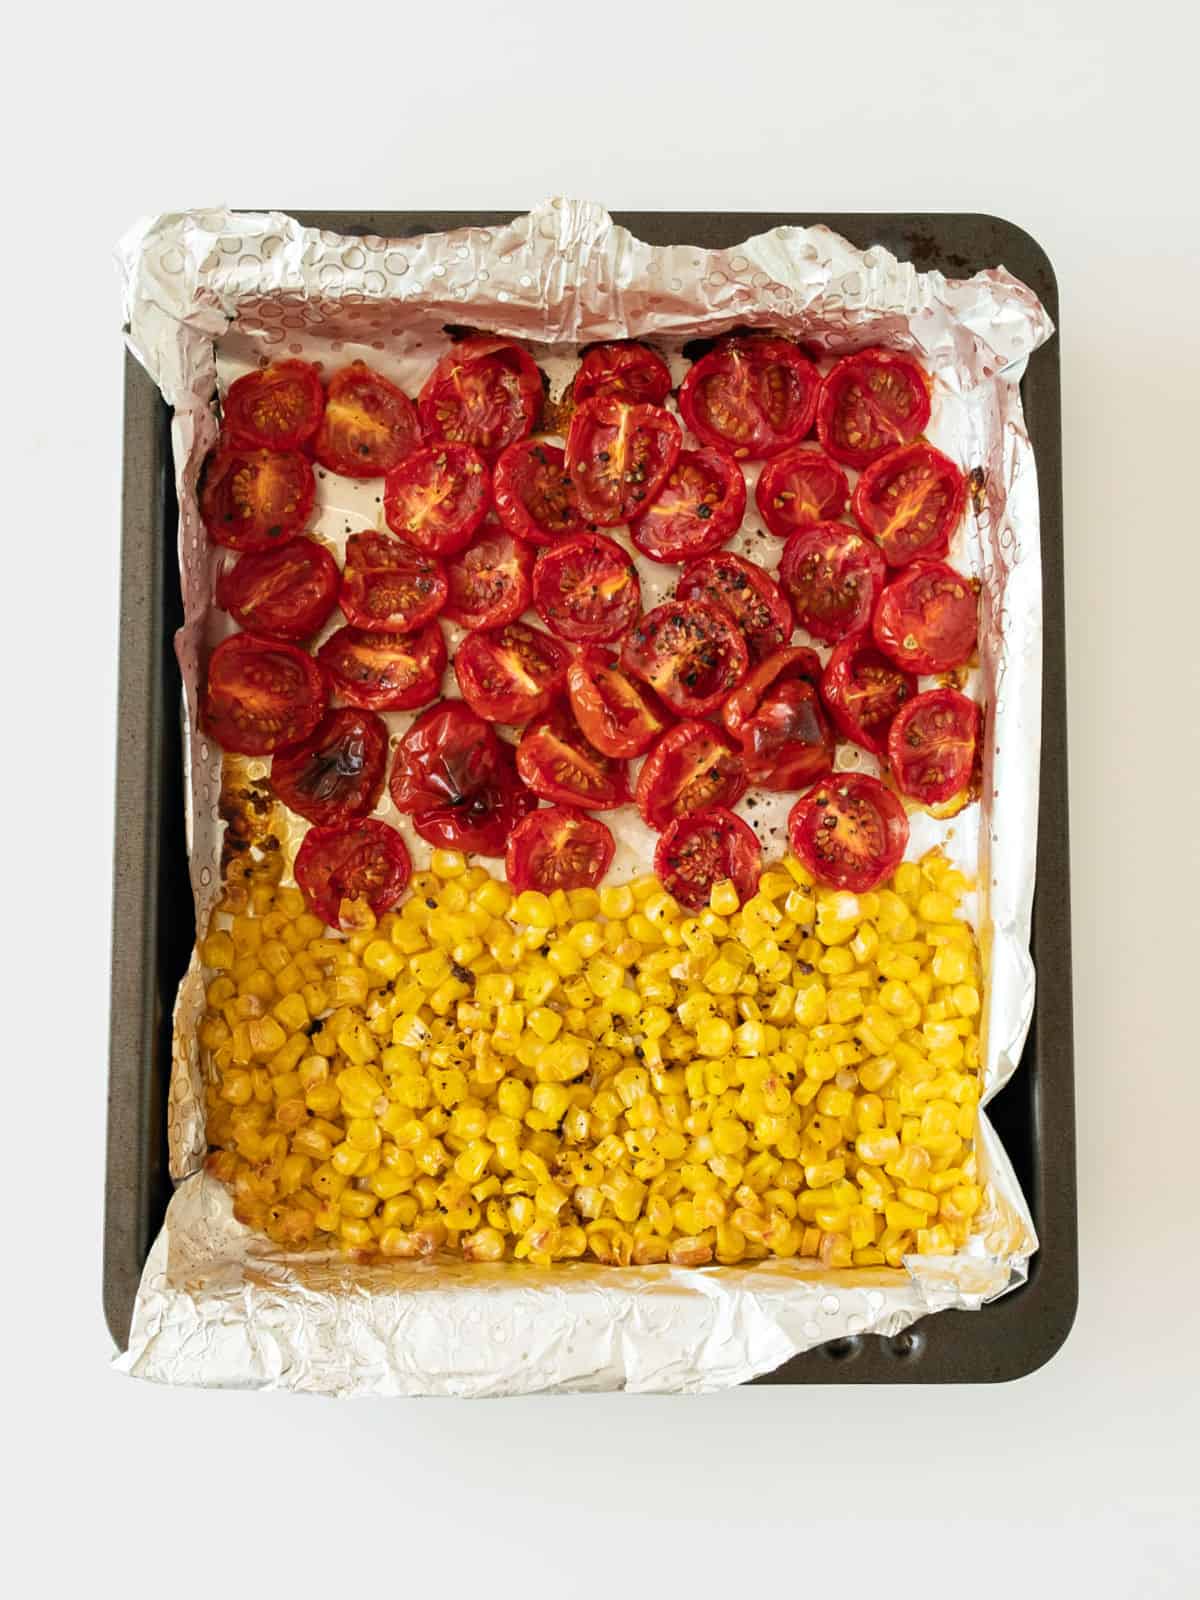 Roasted cherry tomatoes and corn on aluminum foil on a baking tray. White surface.